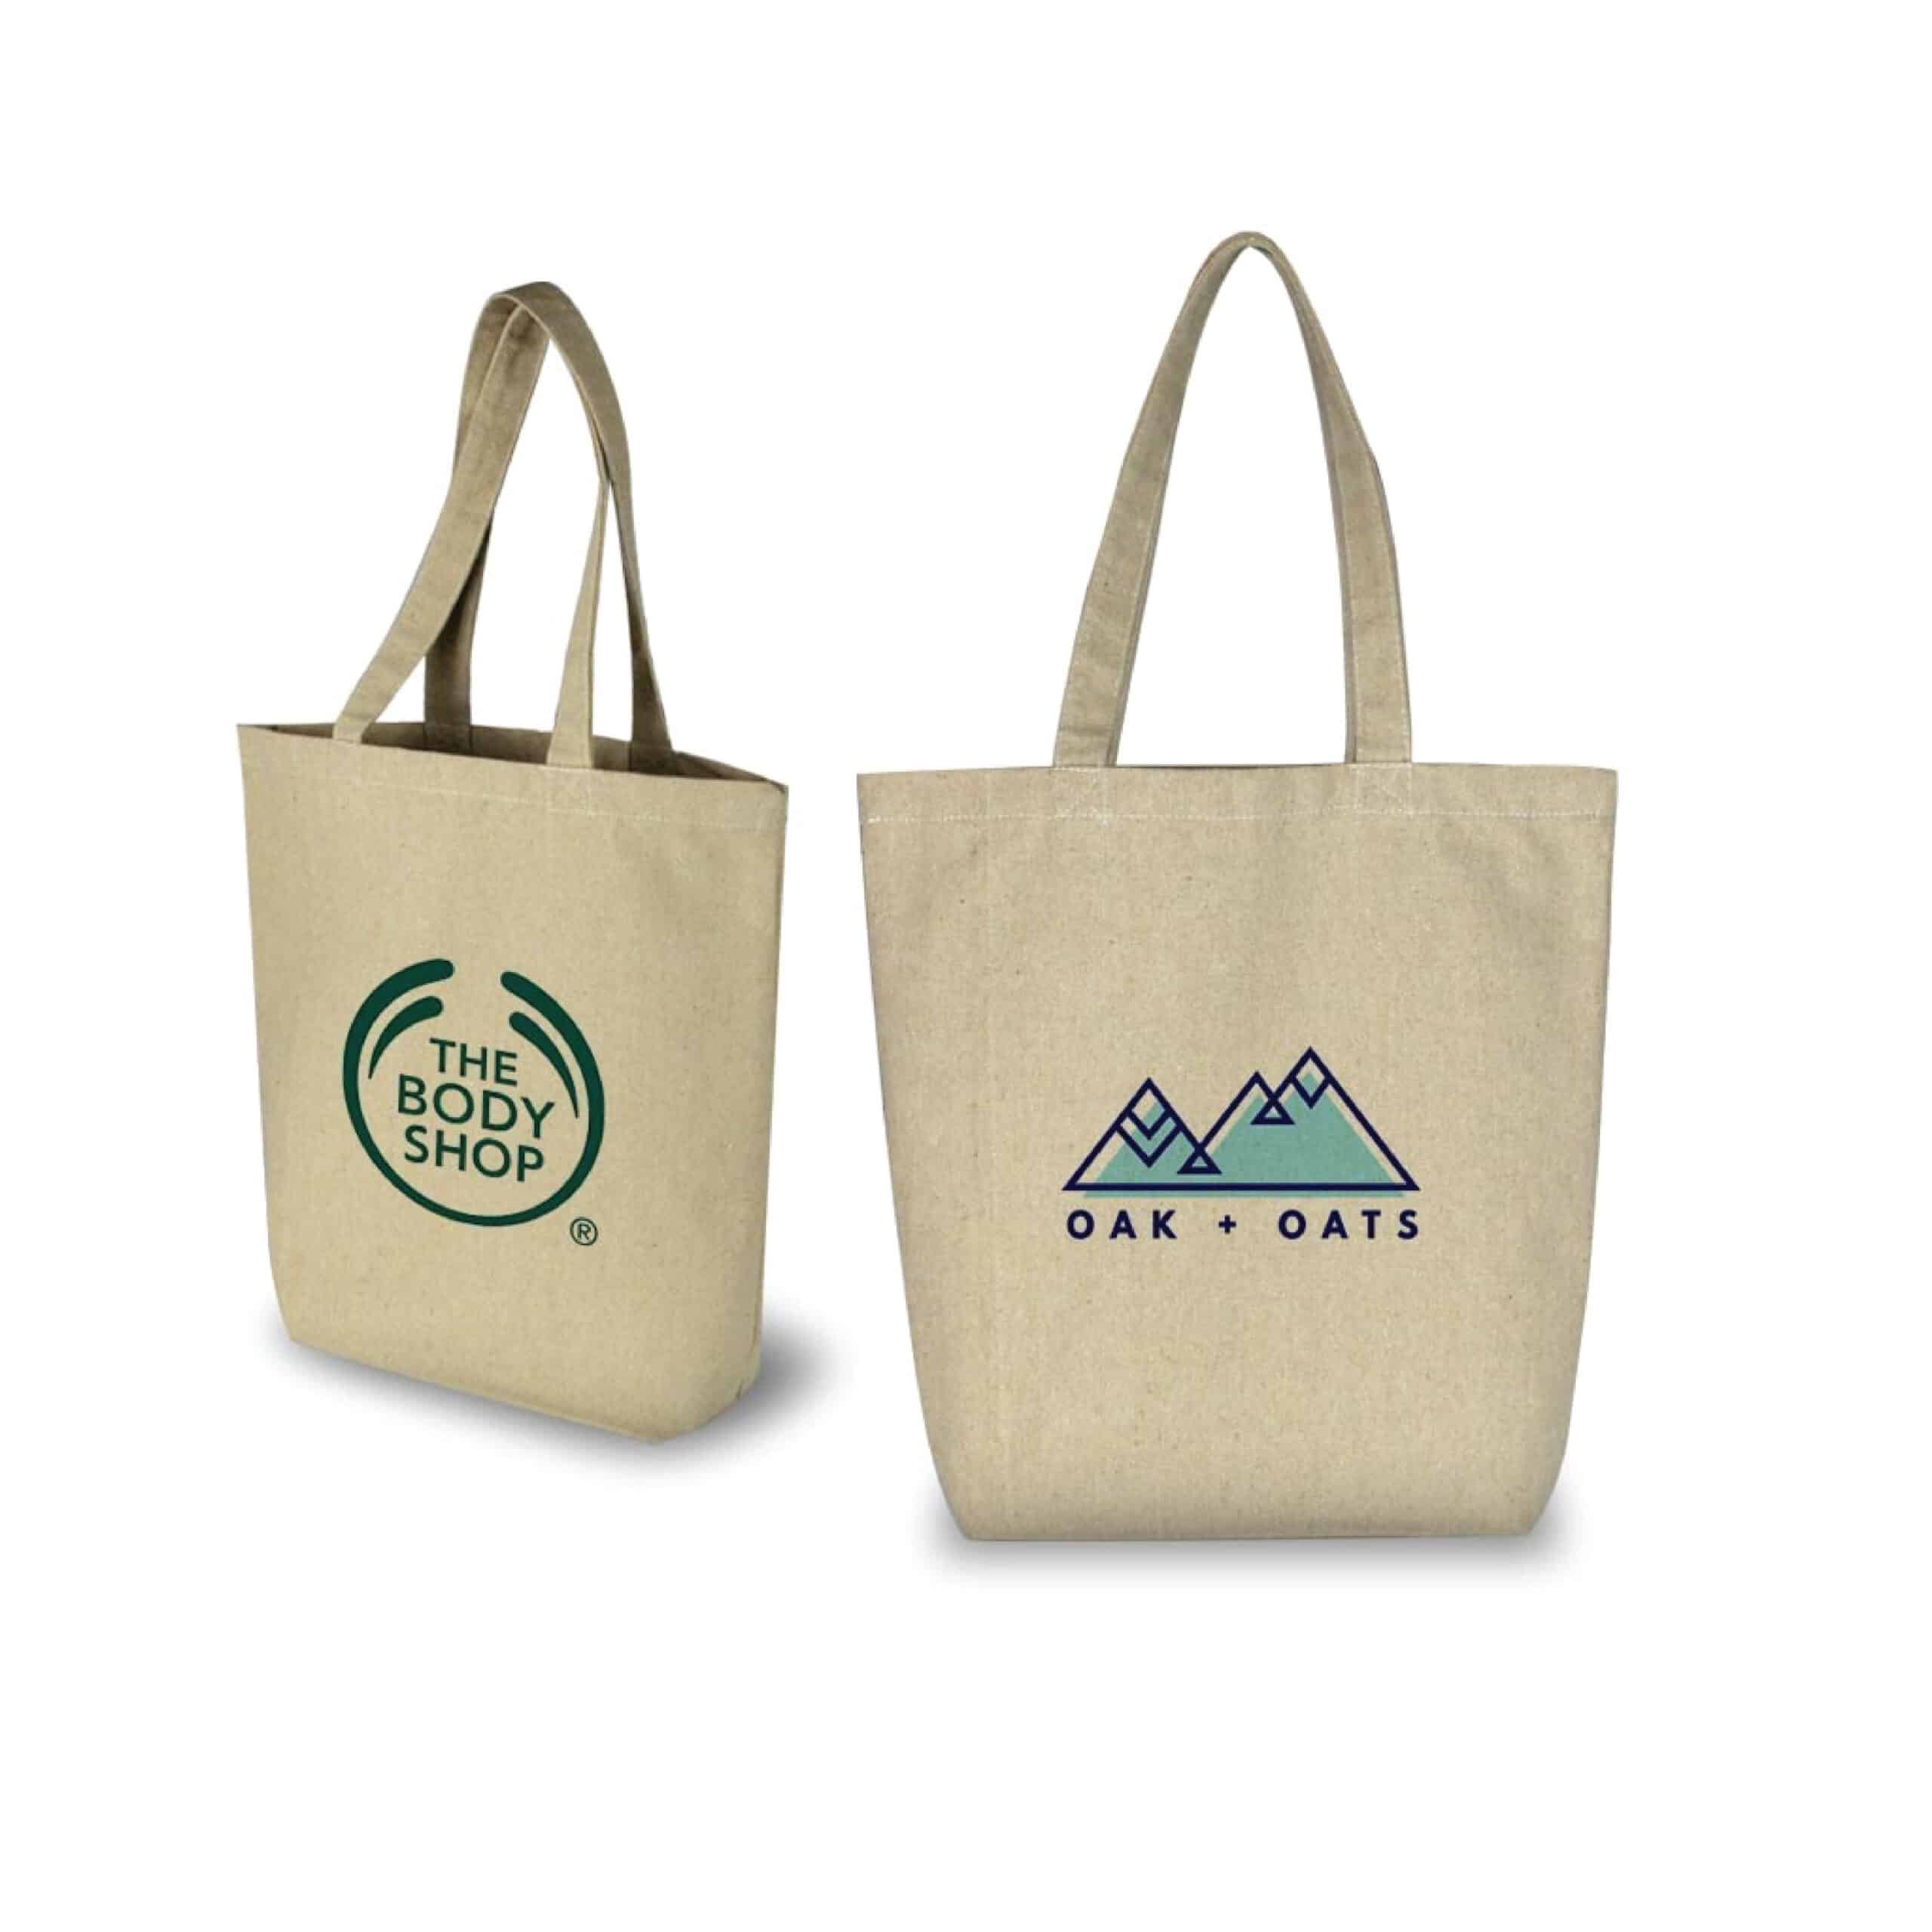 Quality Recycle Bag at SJ-World Gifts Malaysia | Bag Supplier in Malaysia